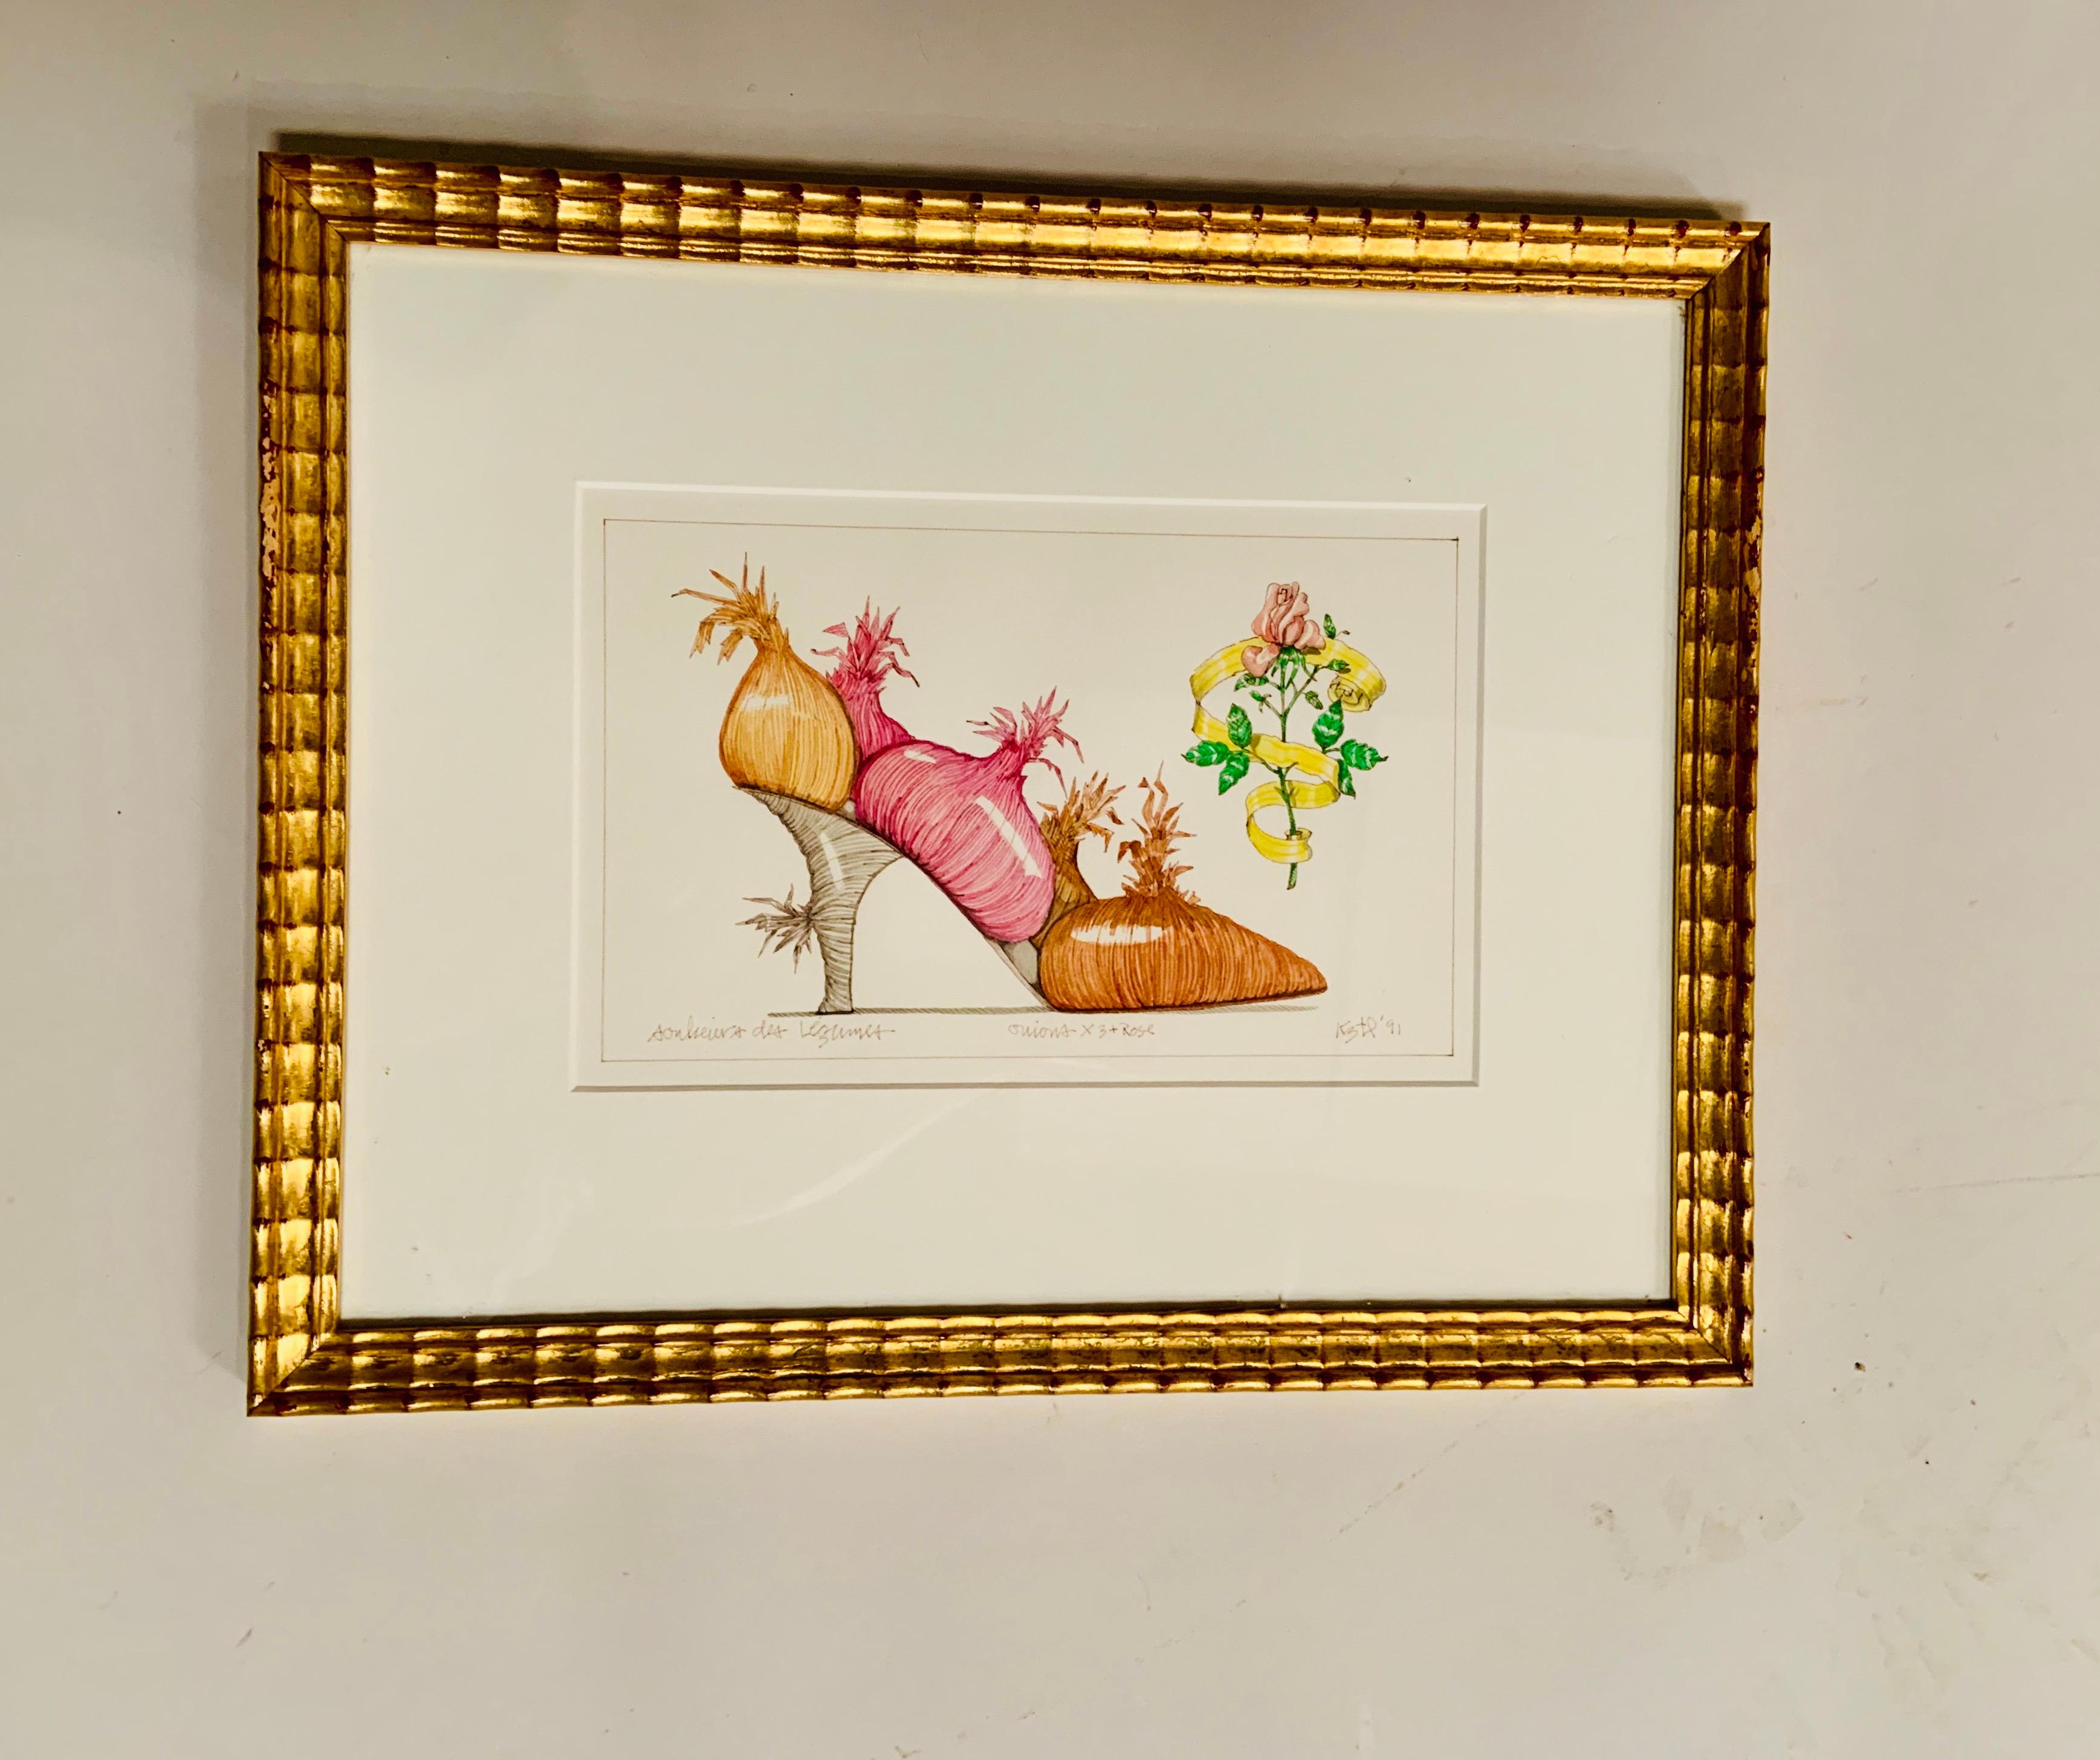 These fantasy watercolors were part of a larger group offered for sale at Stubbs Books & NYC in 1992. They depict women's shoes made from bananas, a pineapple and water lilies. They are beautifully executed and each one is signed, titled and dated